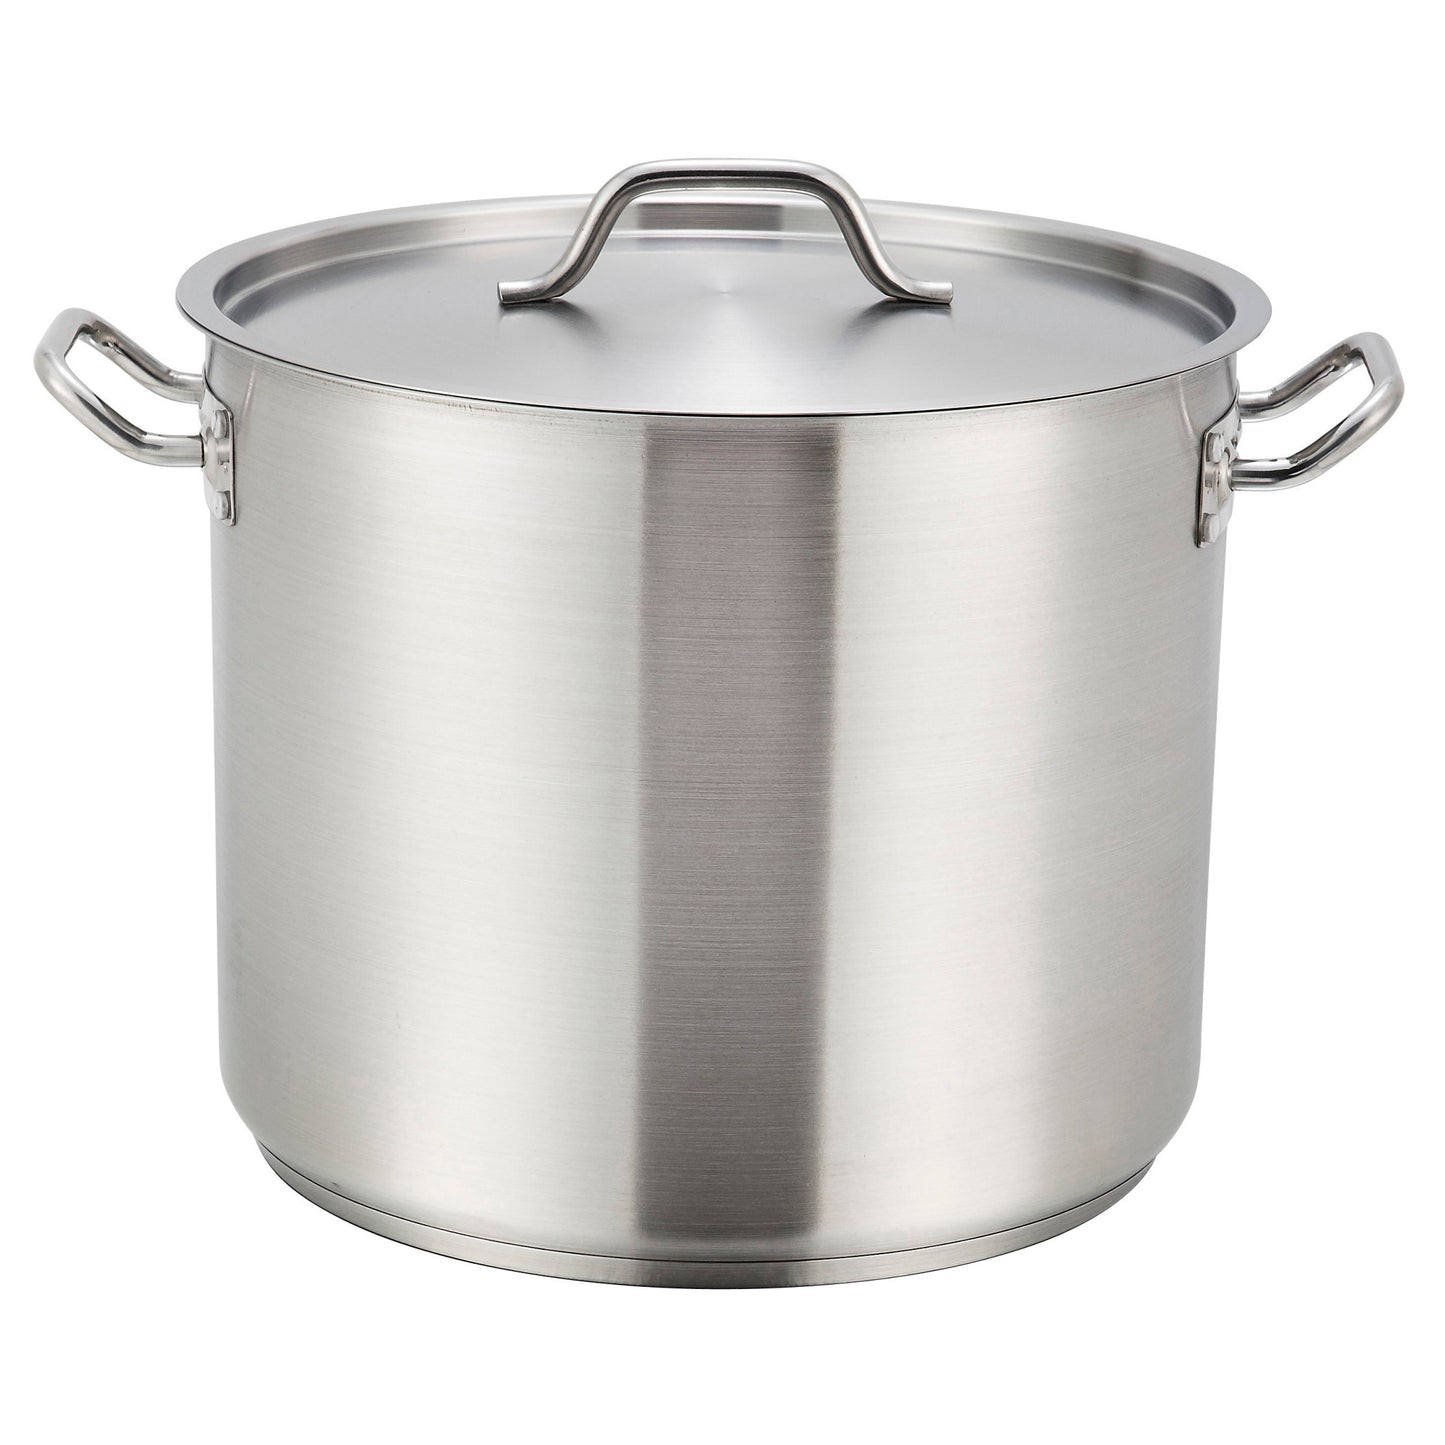 SST-8 - Stainless Steel Stock Pot with Cover - 8 Quart